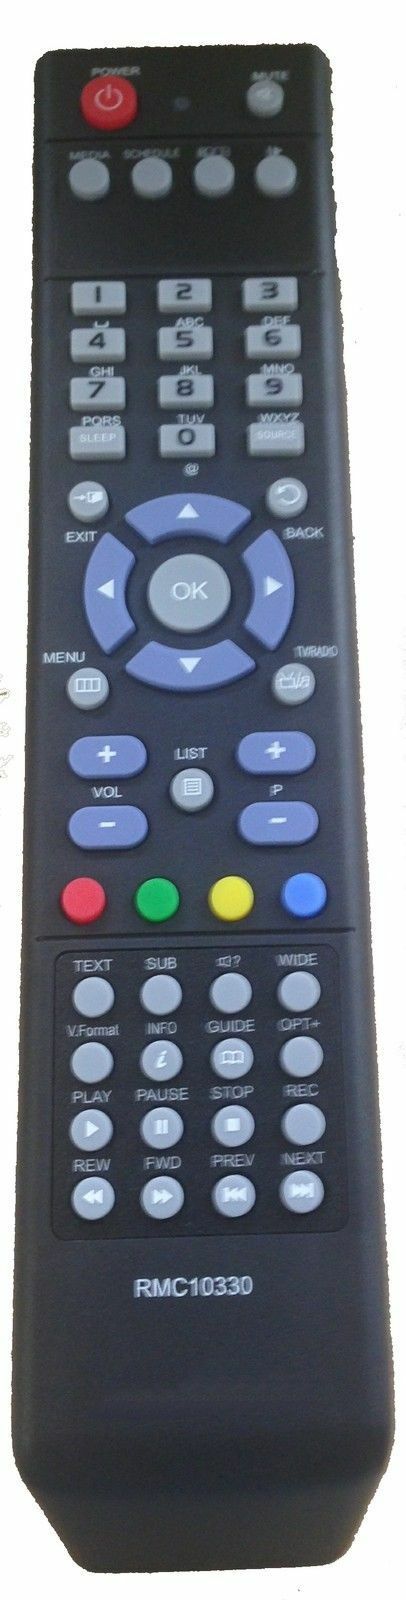 Replacement Remote Control for FOREVER NANOSMART CARDIFF